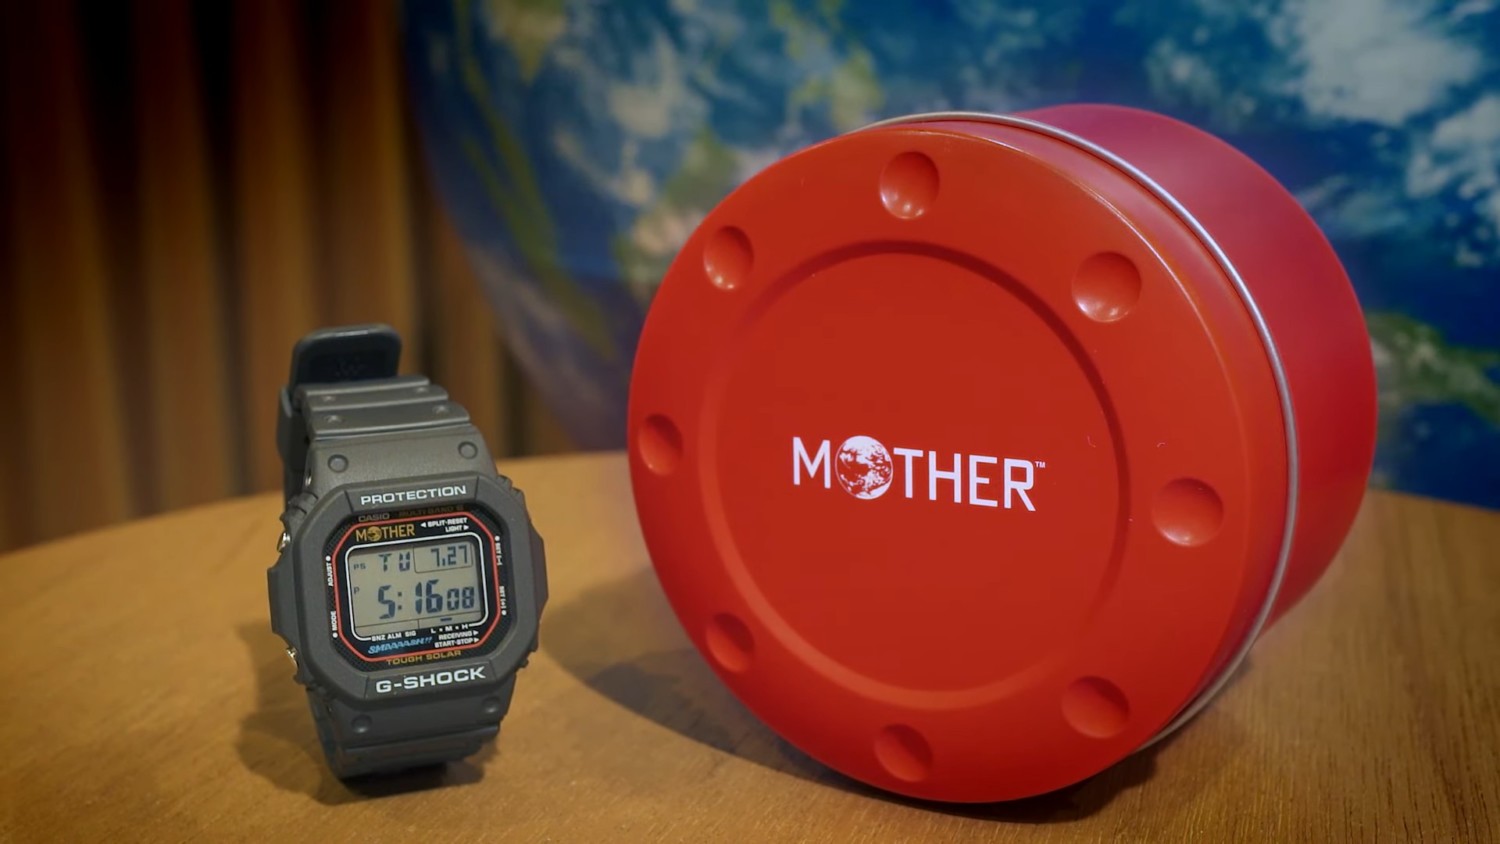 MOTHER』G-SHOCK | patisserie-cle.com